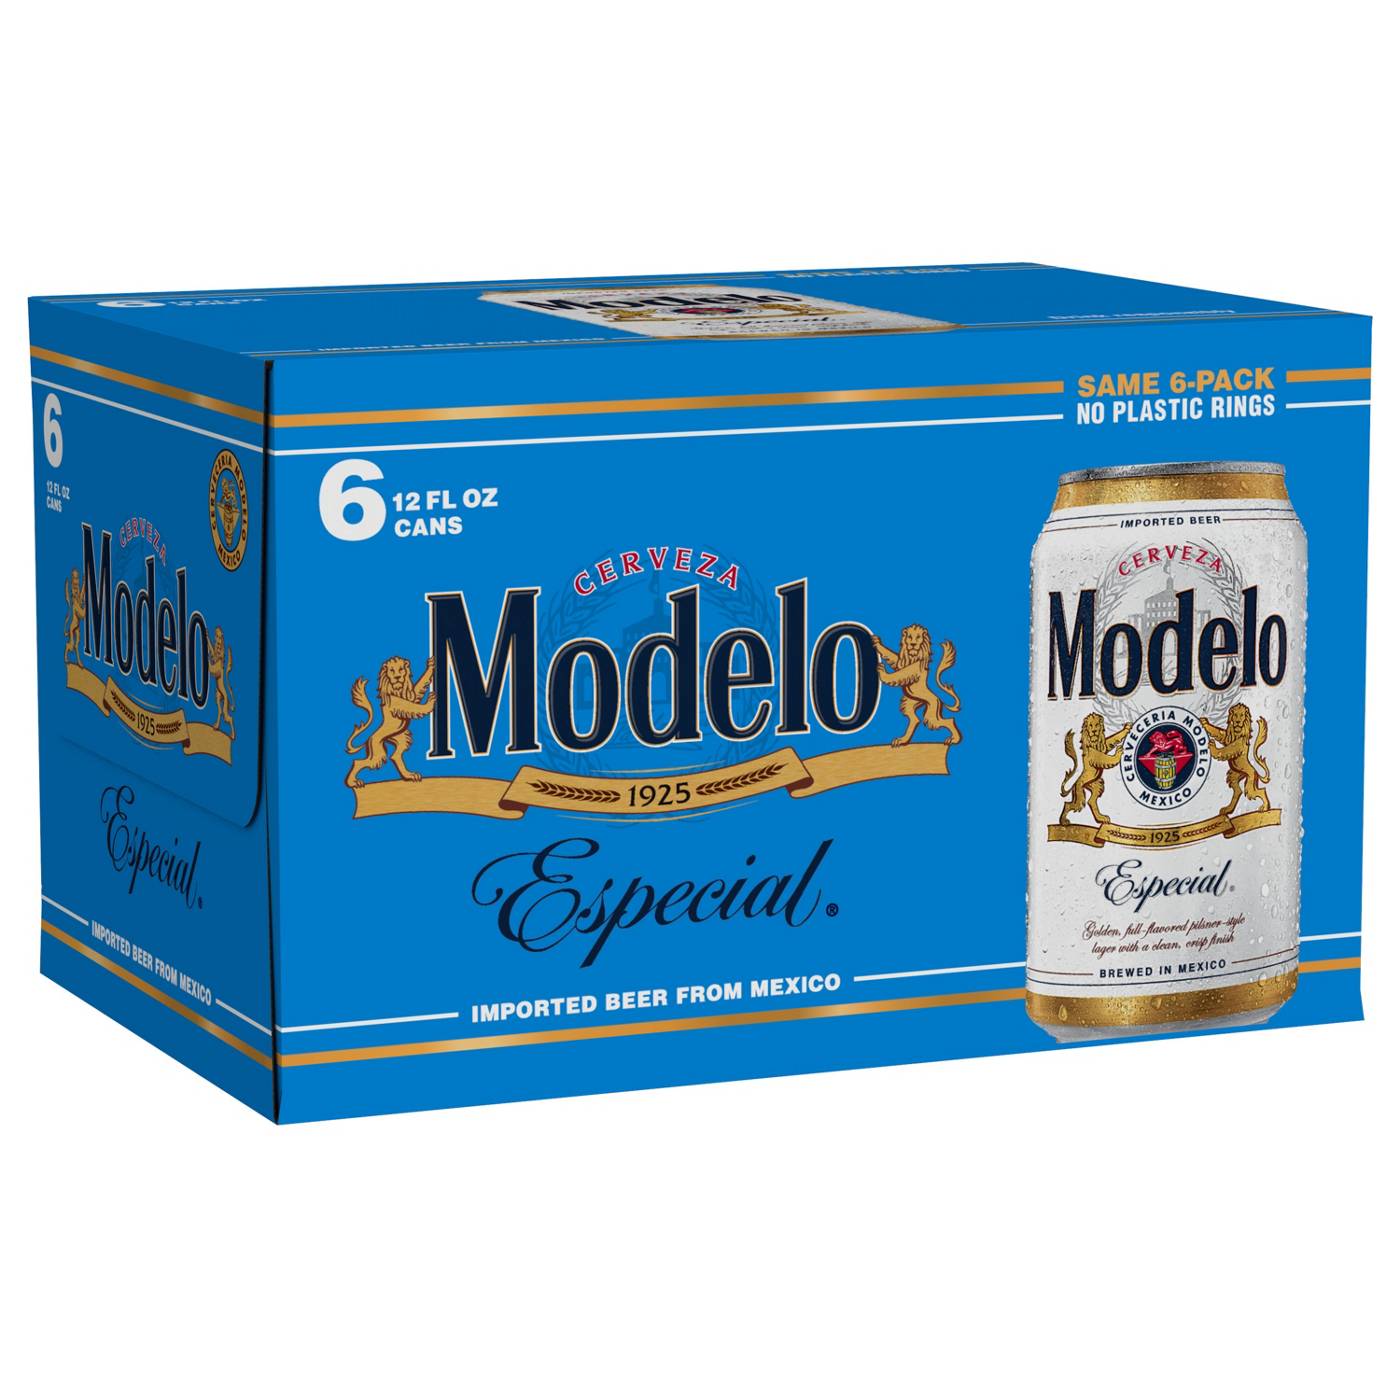 Modelo Especial Mexican Lager Import Beer 12 oz Cans, 6 pk; image 1 of 11